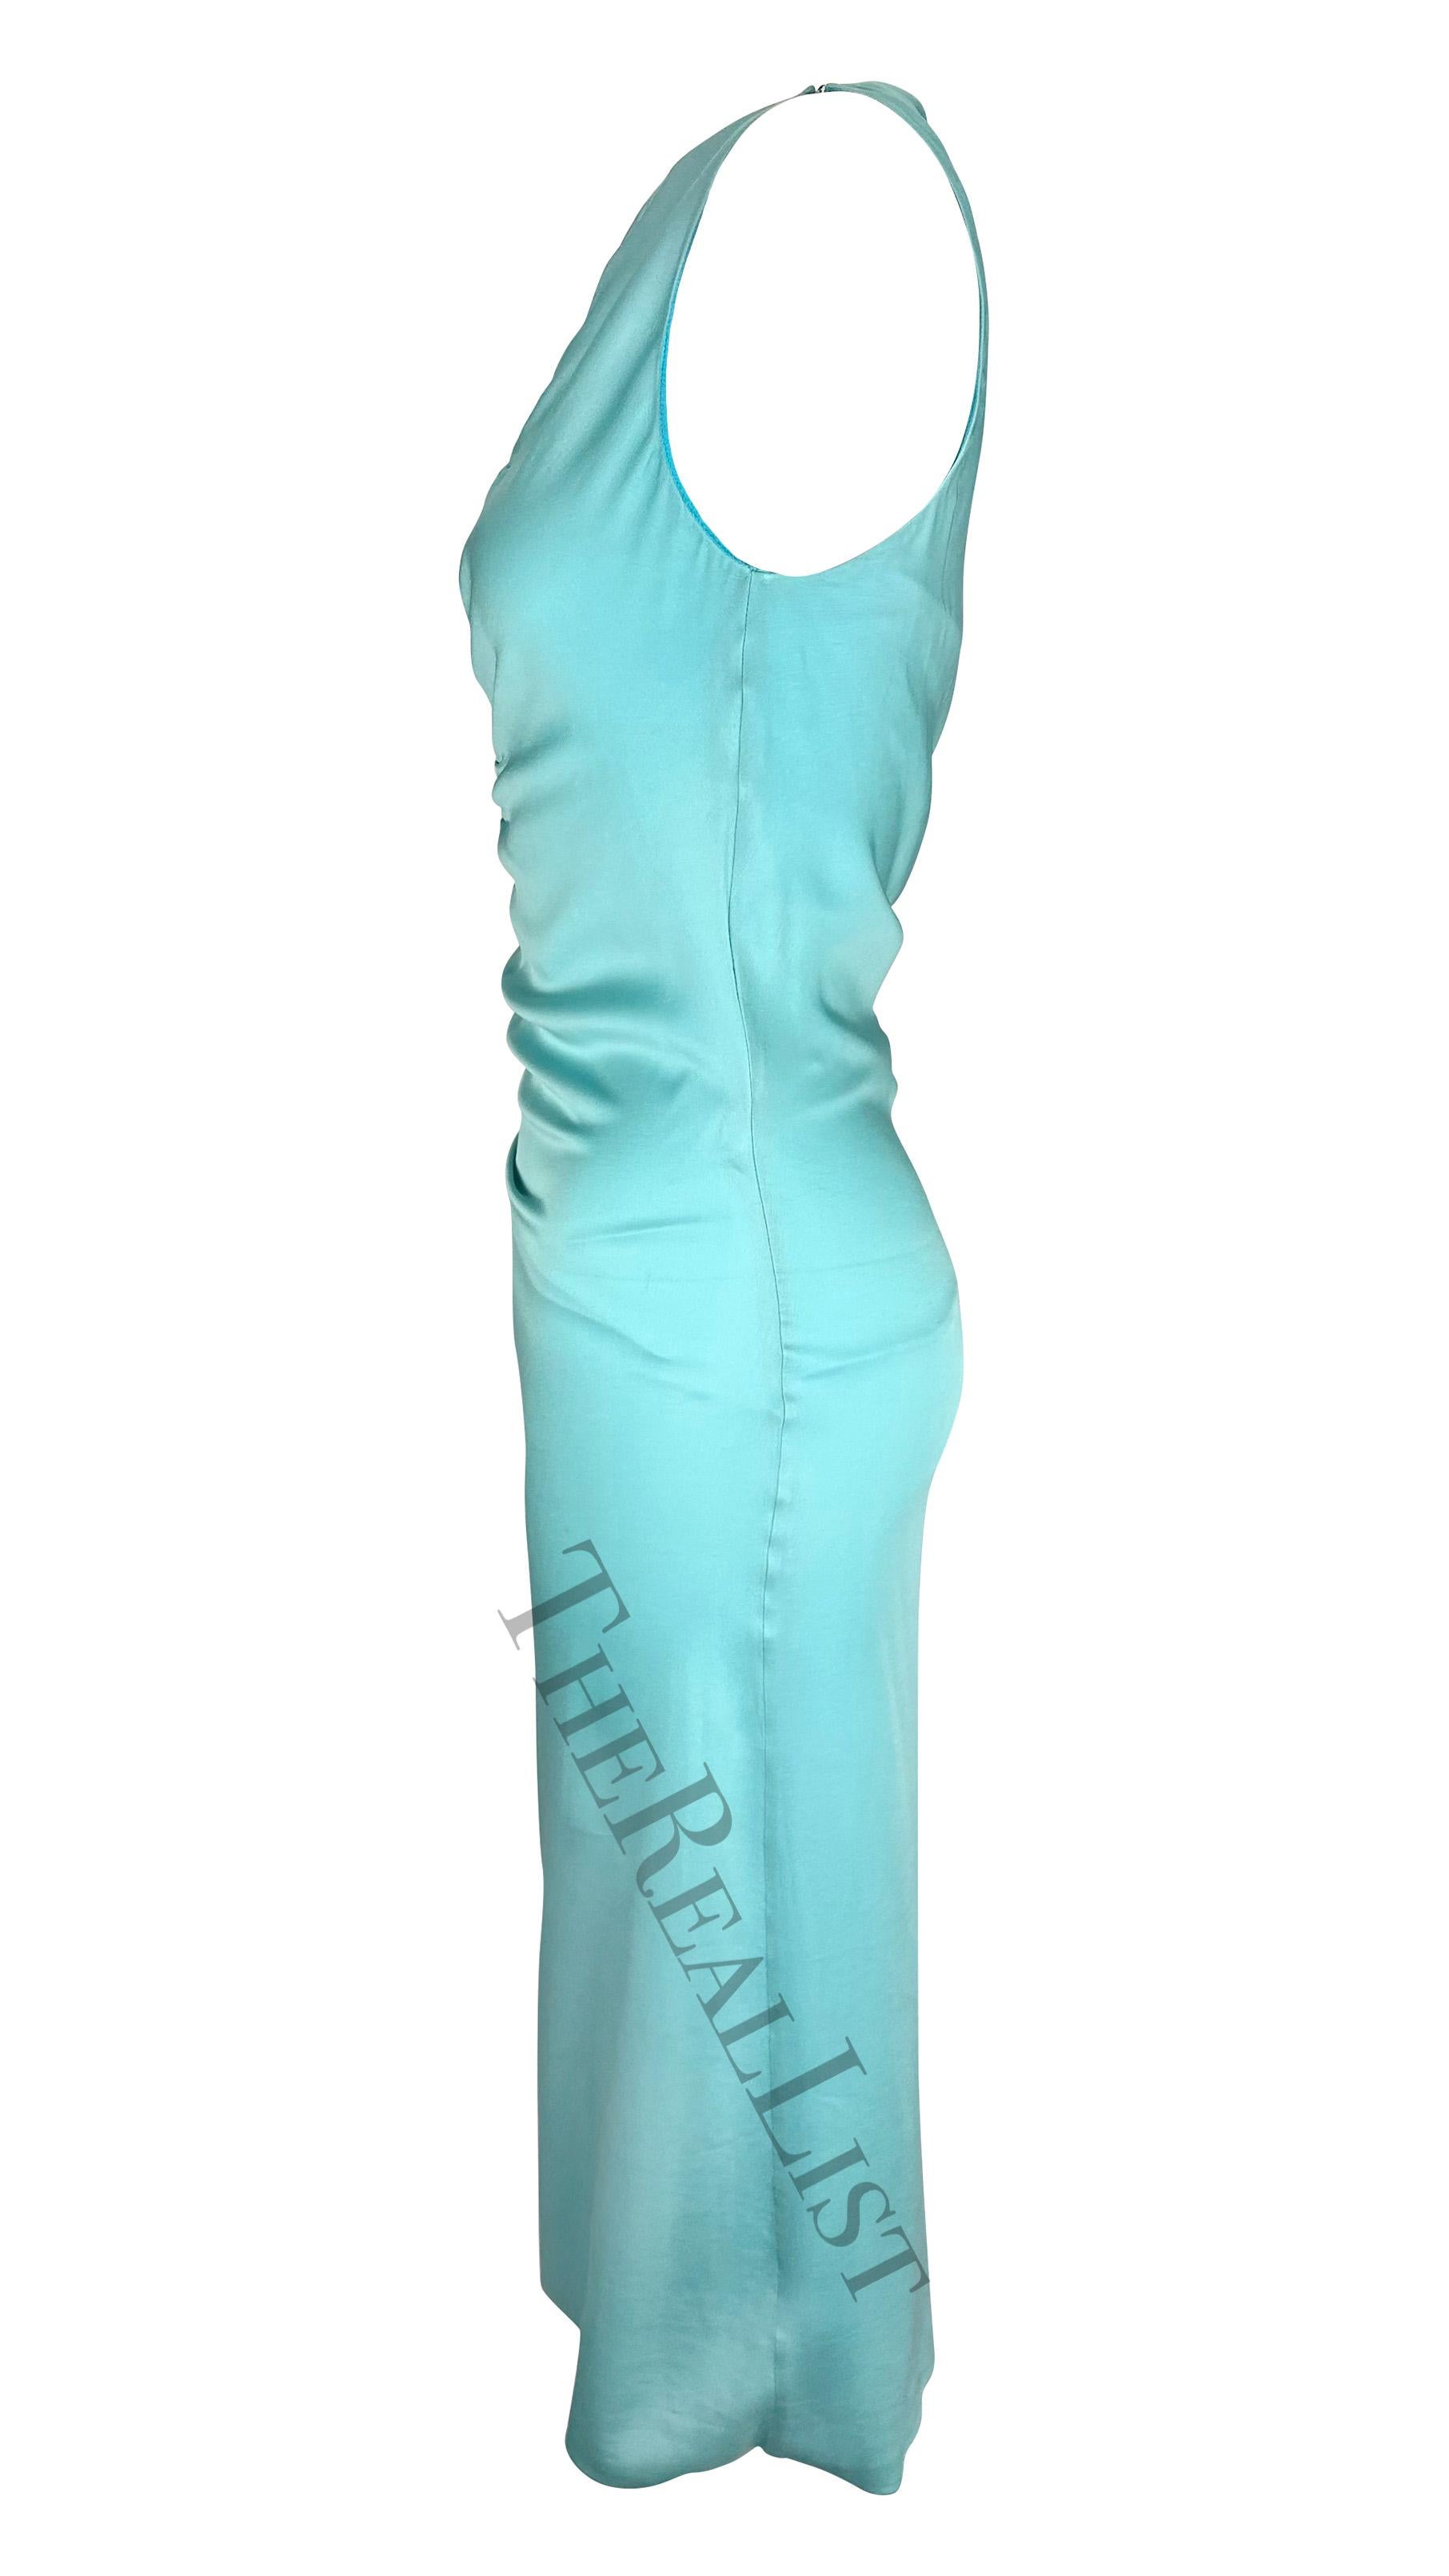 S/S 2001 Gucci by Tom Ford Baby Blue Ruched Sleeveless Dress In Good Condition For Sale In West Hollywood, CA